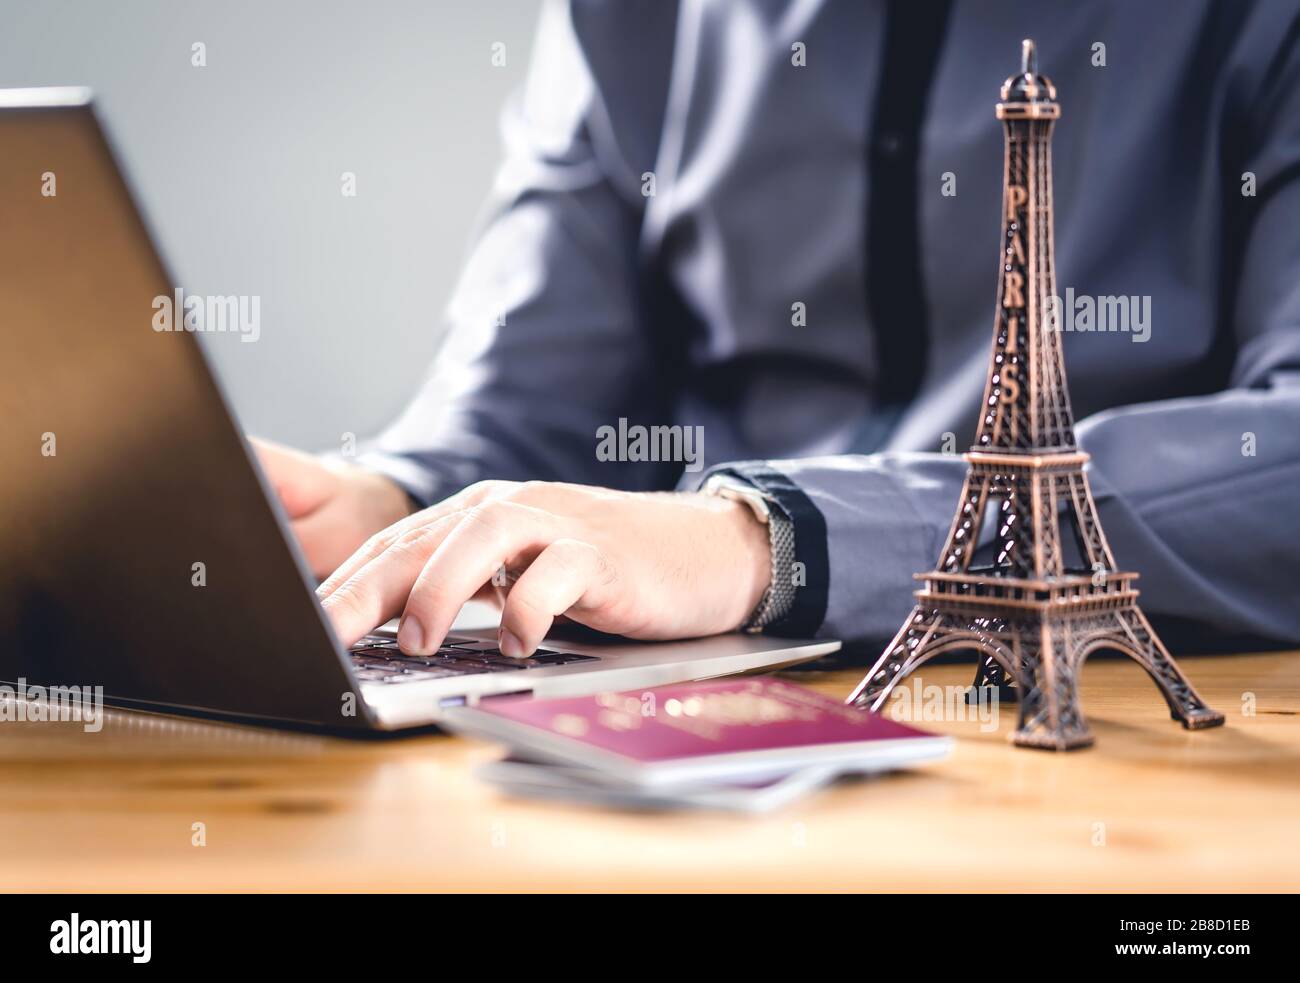 Passport for vacation. Travel document for online reservation or electronic visa identification. Tourism in EU. Tourist booking a holiday in France. Stock Photo